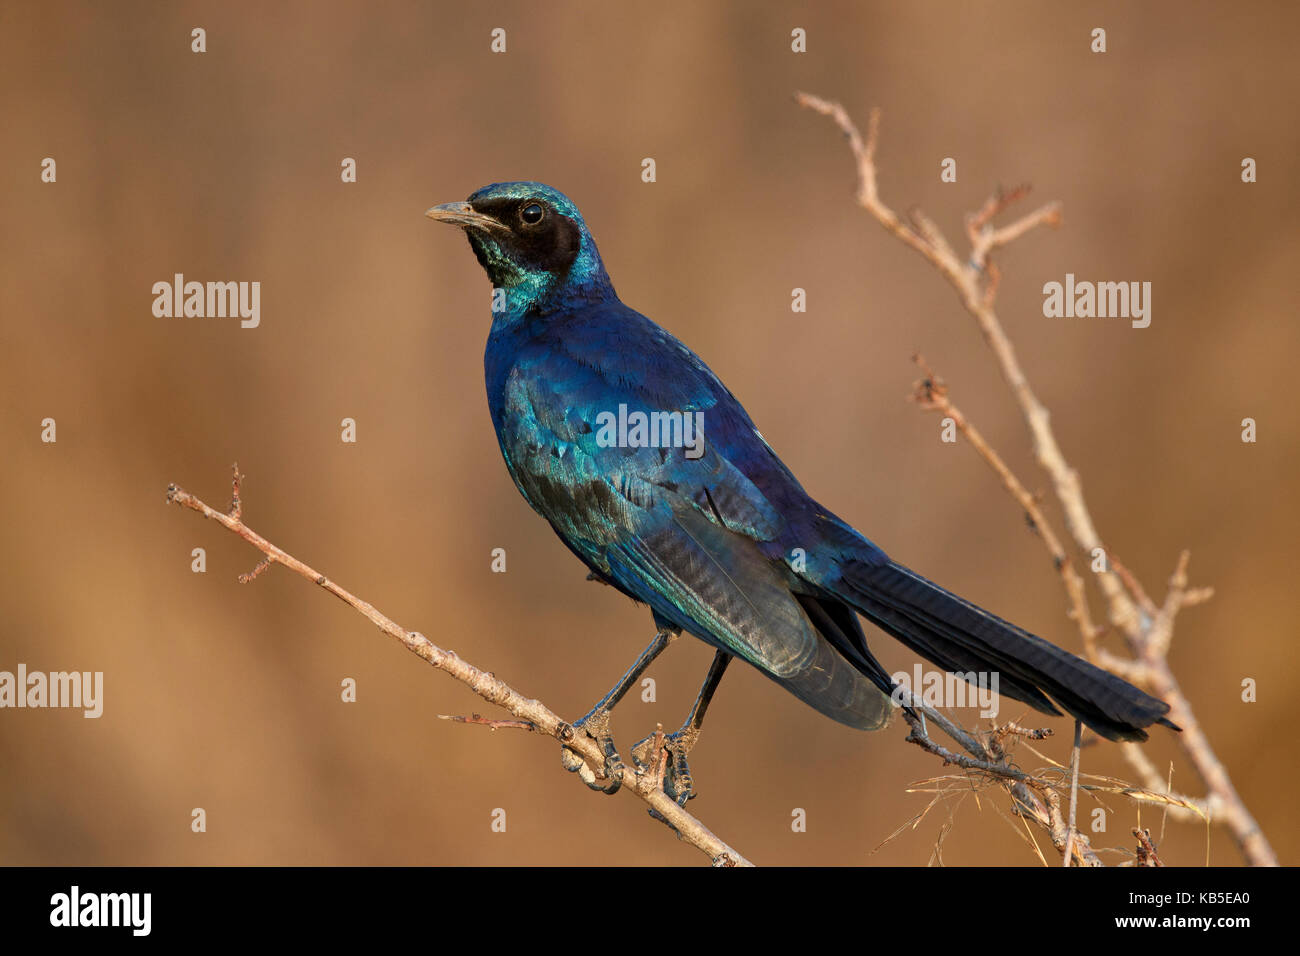 Burchell's Glossy Starling (Burchell's Starling) (Lamprotornis australis), Kruger National Park, Sudafrica, Africa Foto Stock